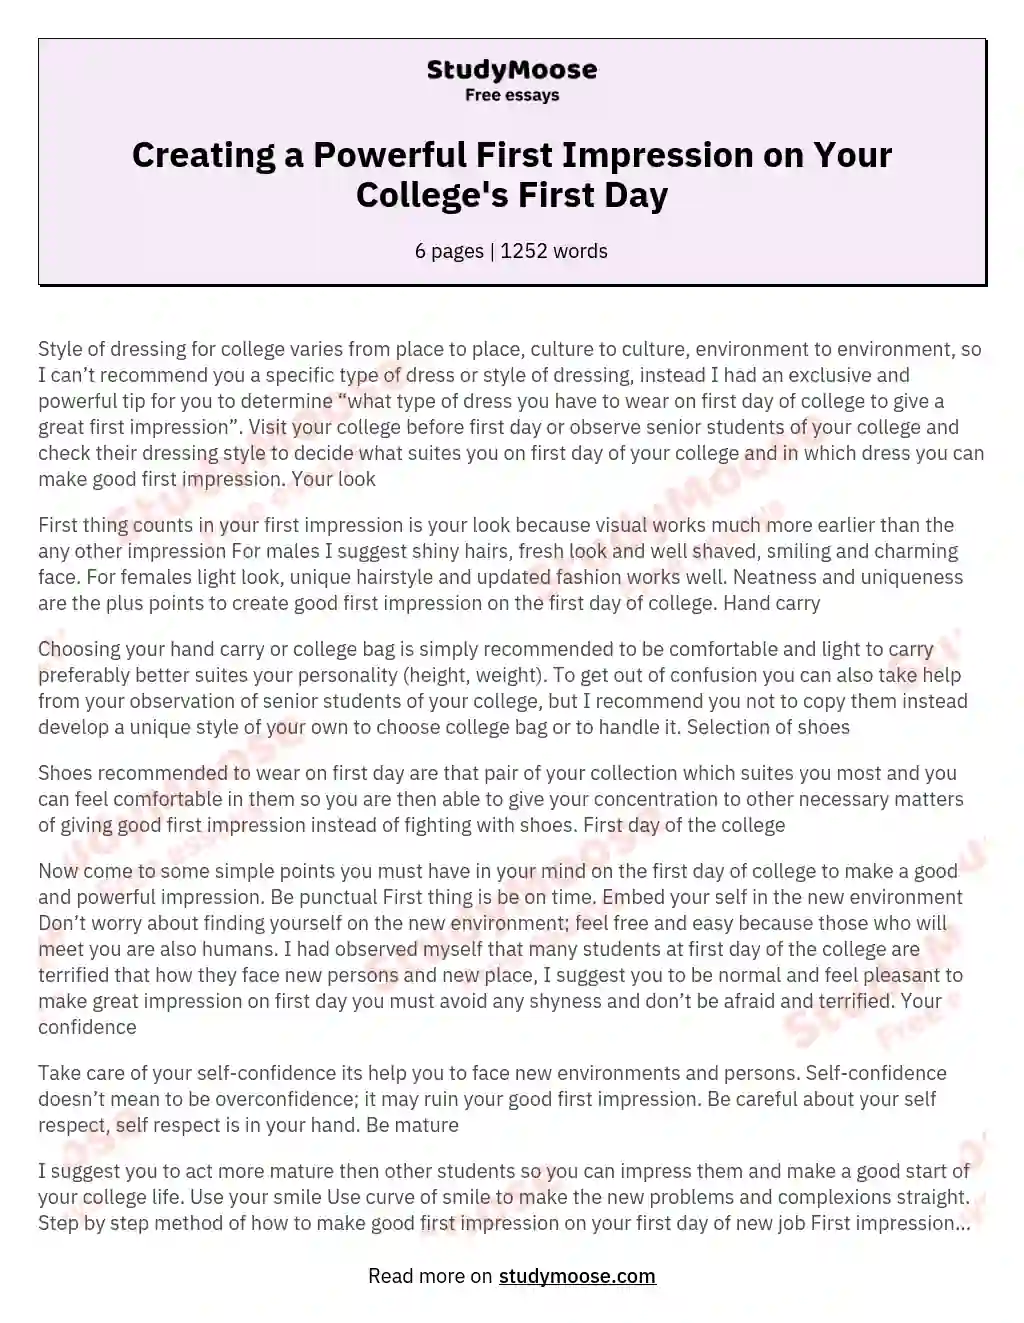 Creating a Powerful First Impression on Your College's First Day essay